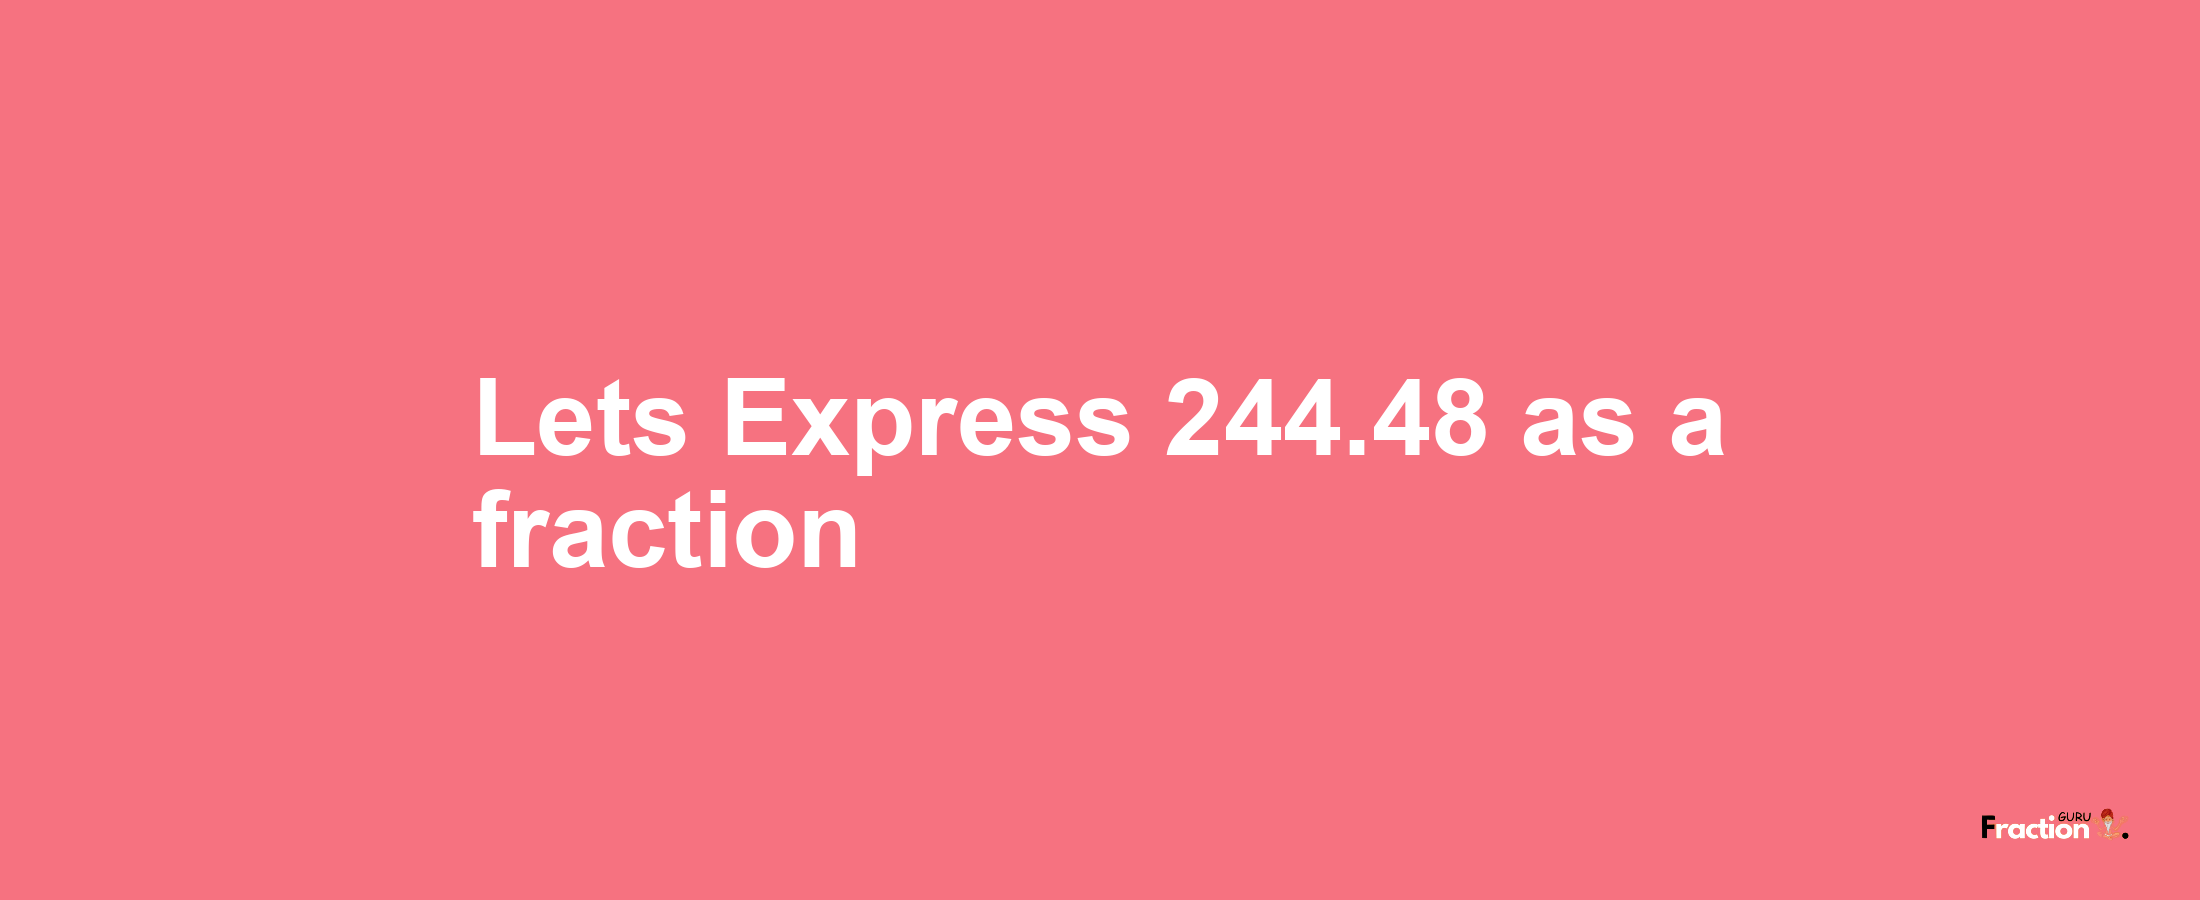 Lets Express 244.48 as afraction